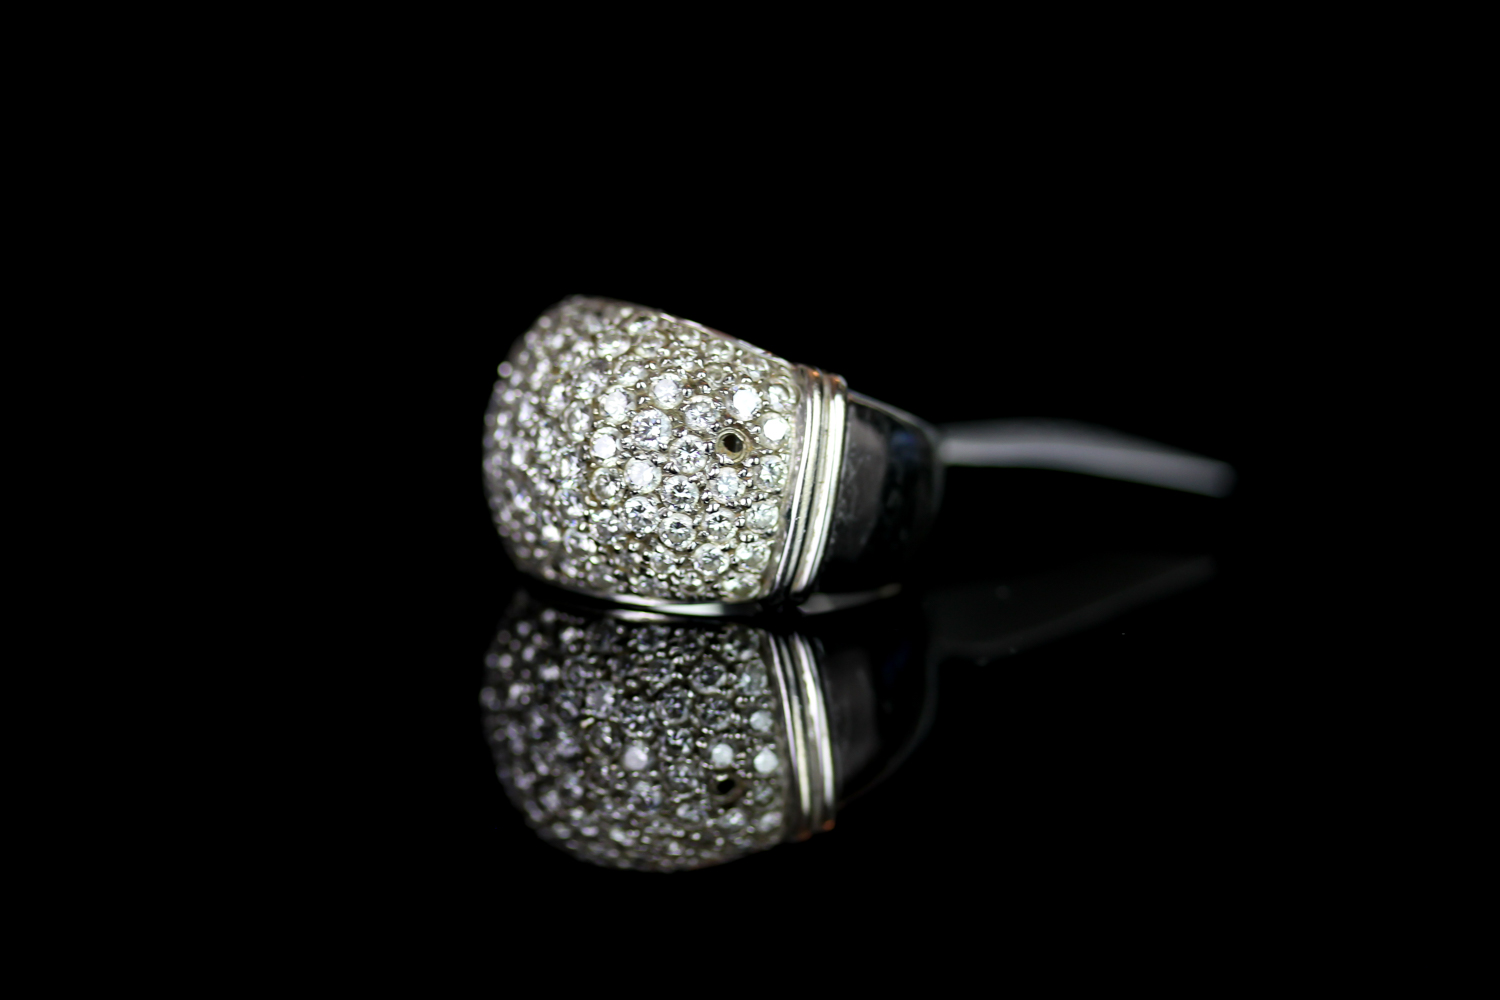 Diamond cluster ring, pave set round brilliant cut diamonds with 1 diamond missing, stamped 18ct - Image 2 of 3